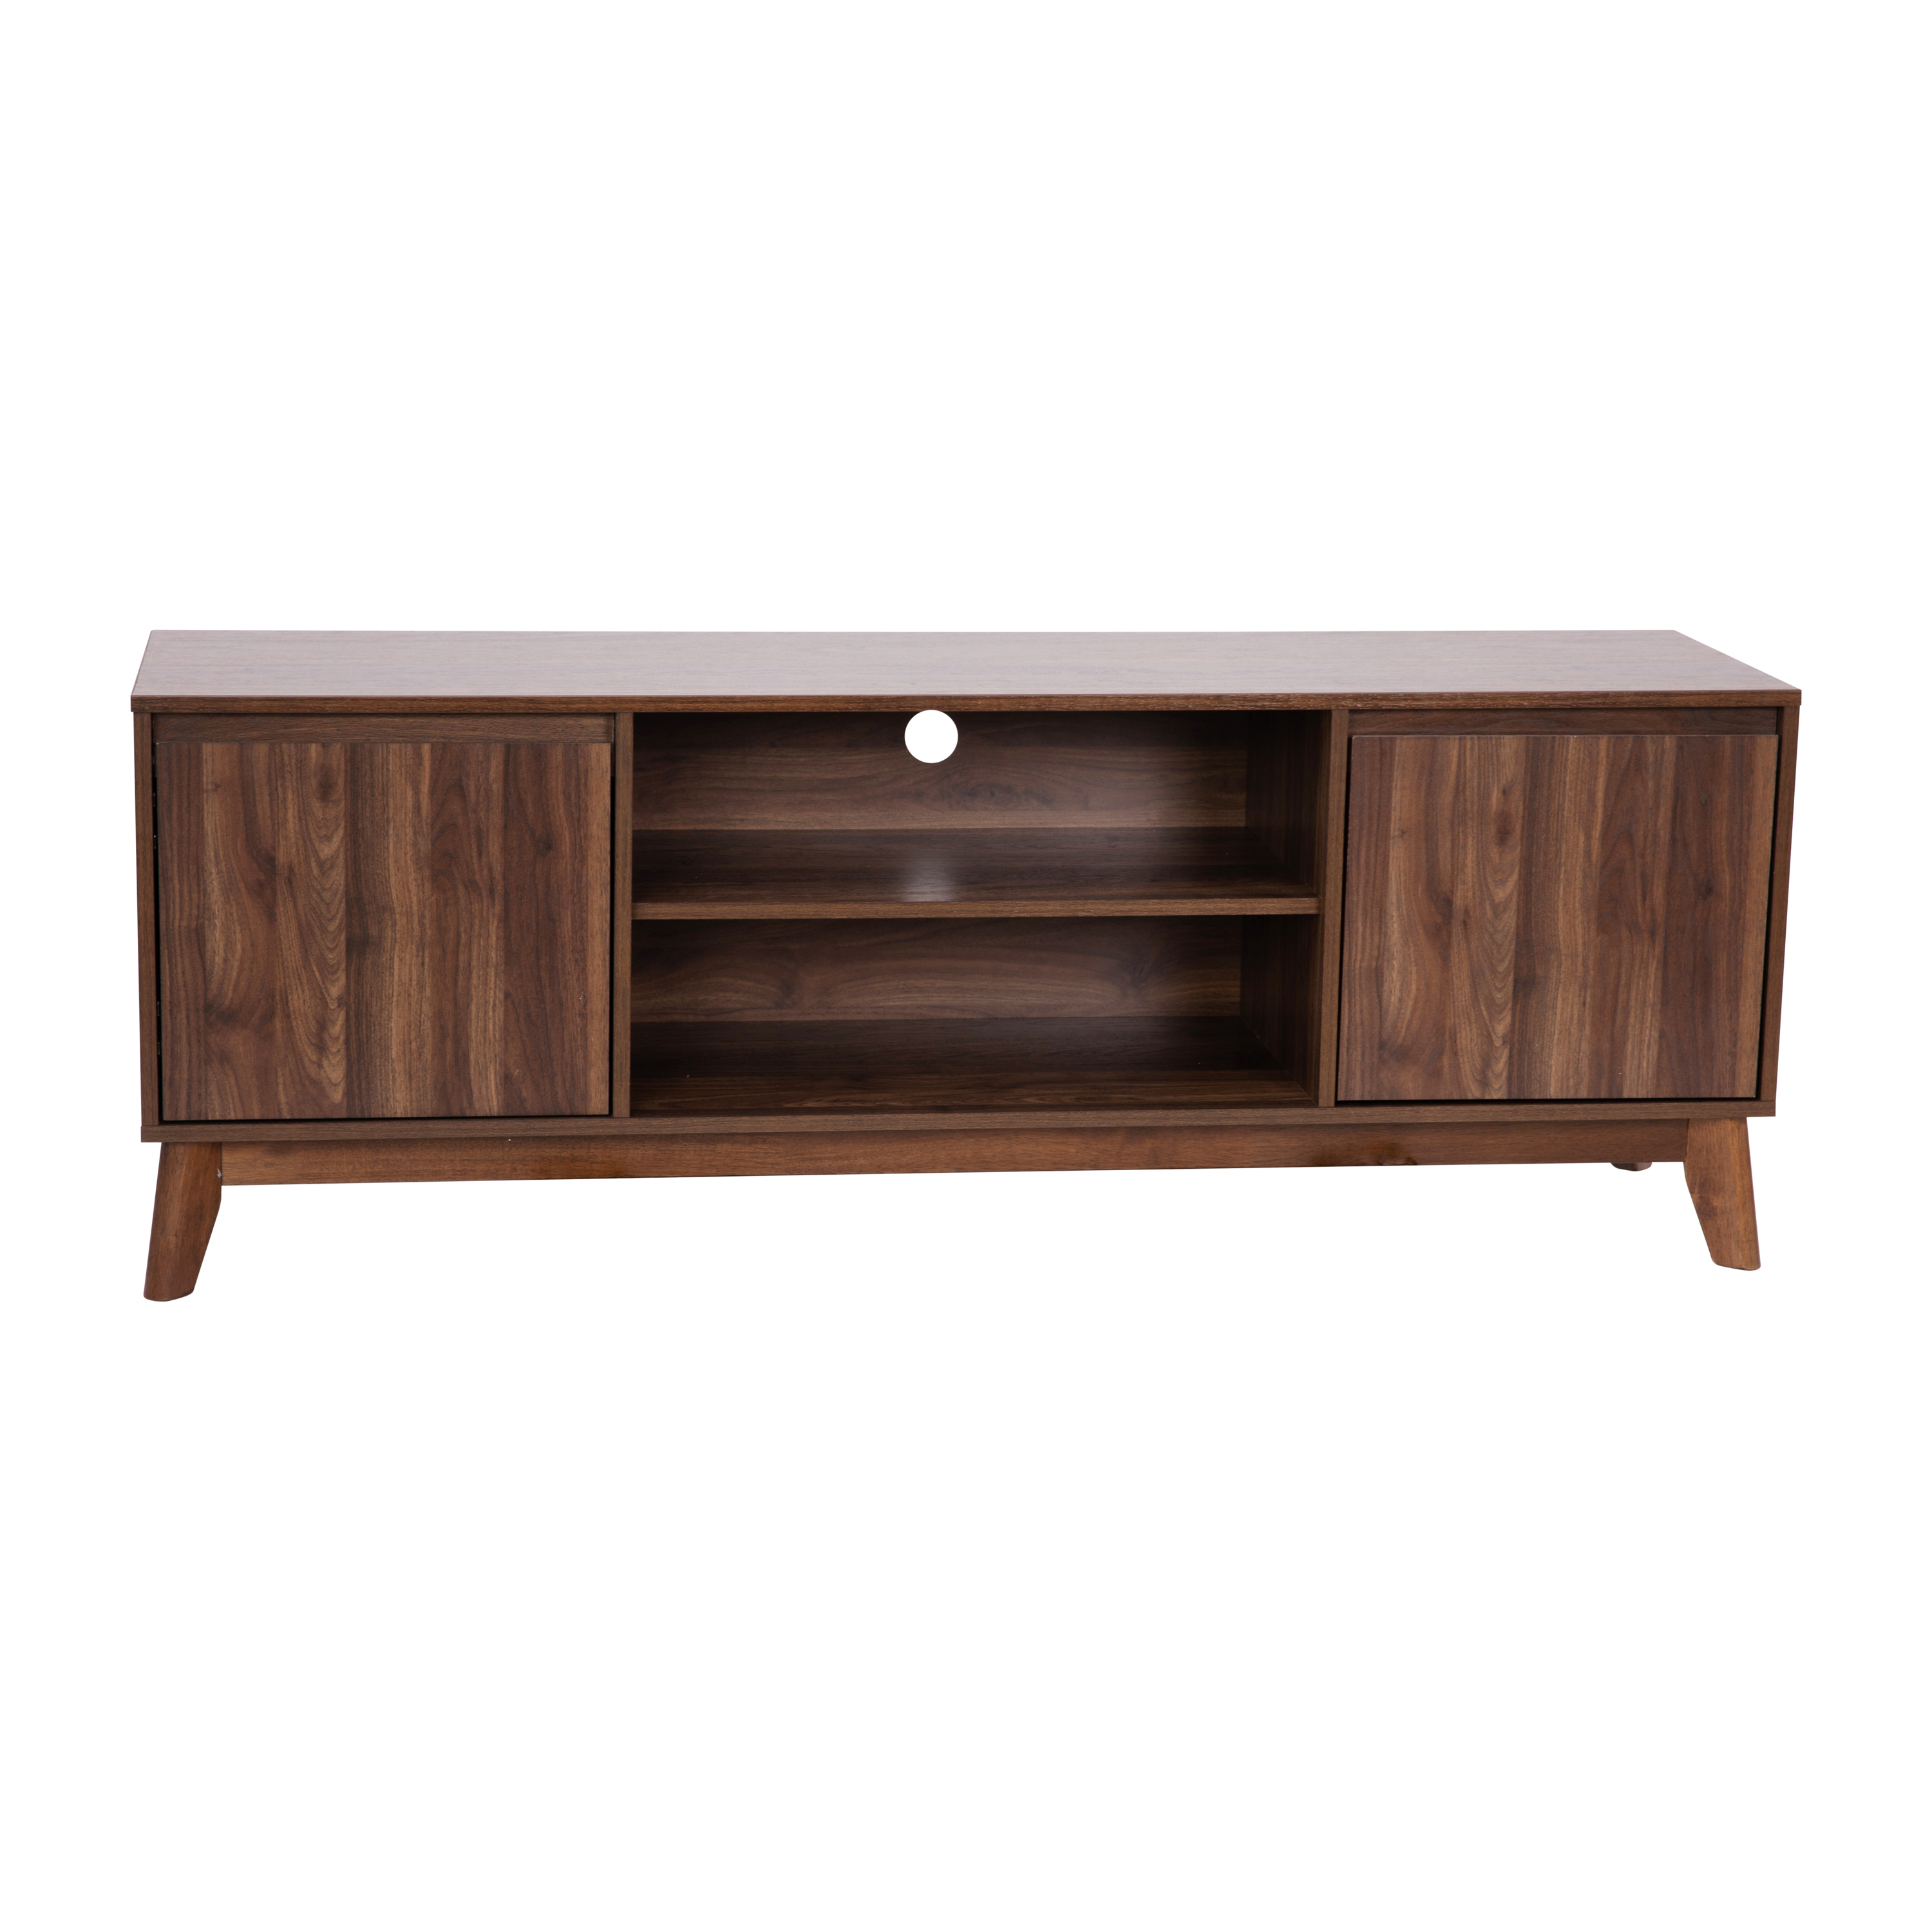 Flash Furniture EM-TV1500-WAL-GG Mid-Century 60" Walnut Media Center with Shelf and Doors for up to 64" TV's